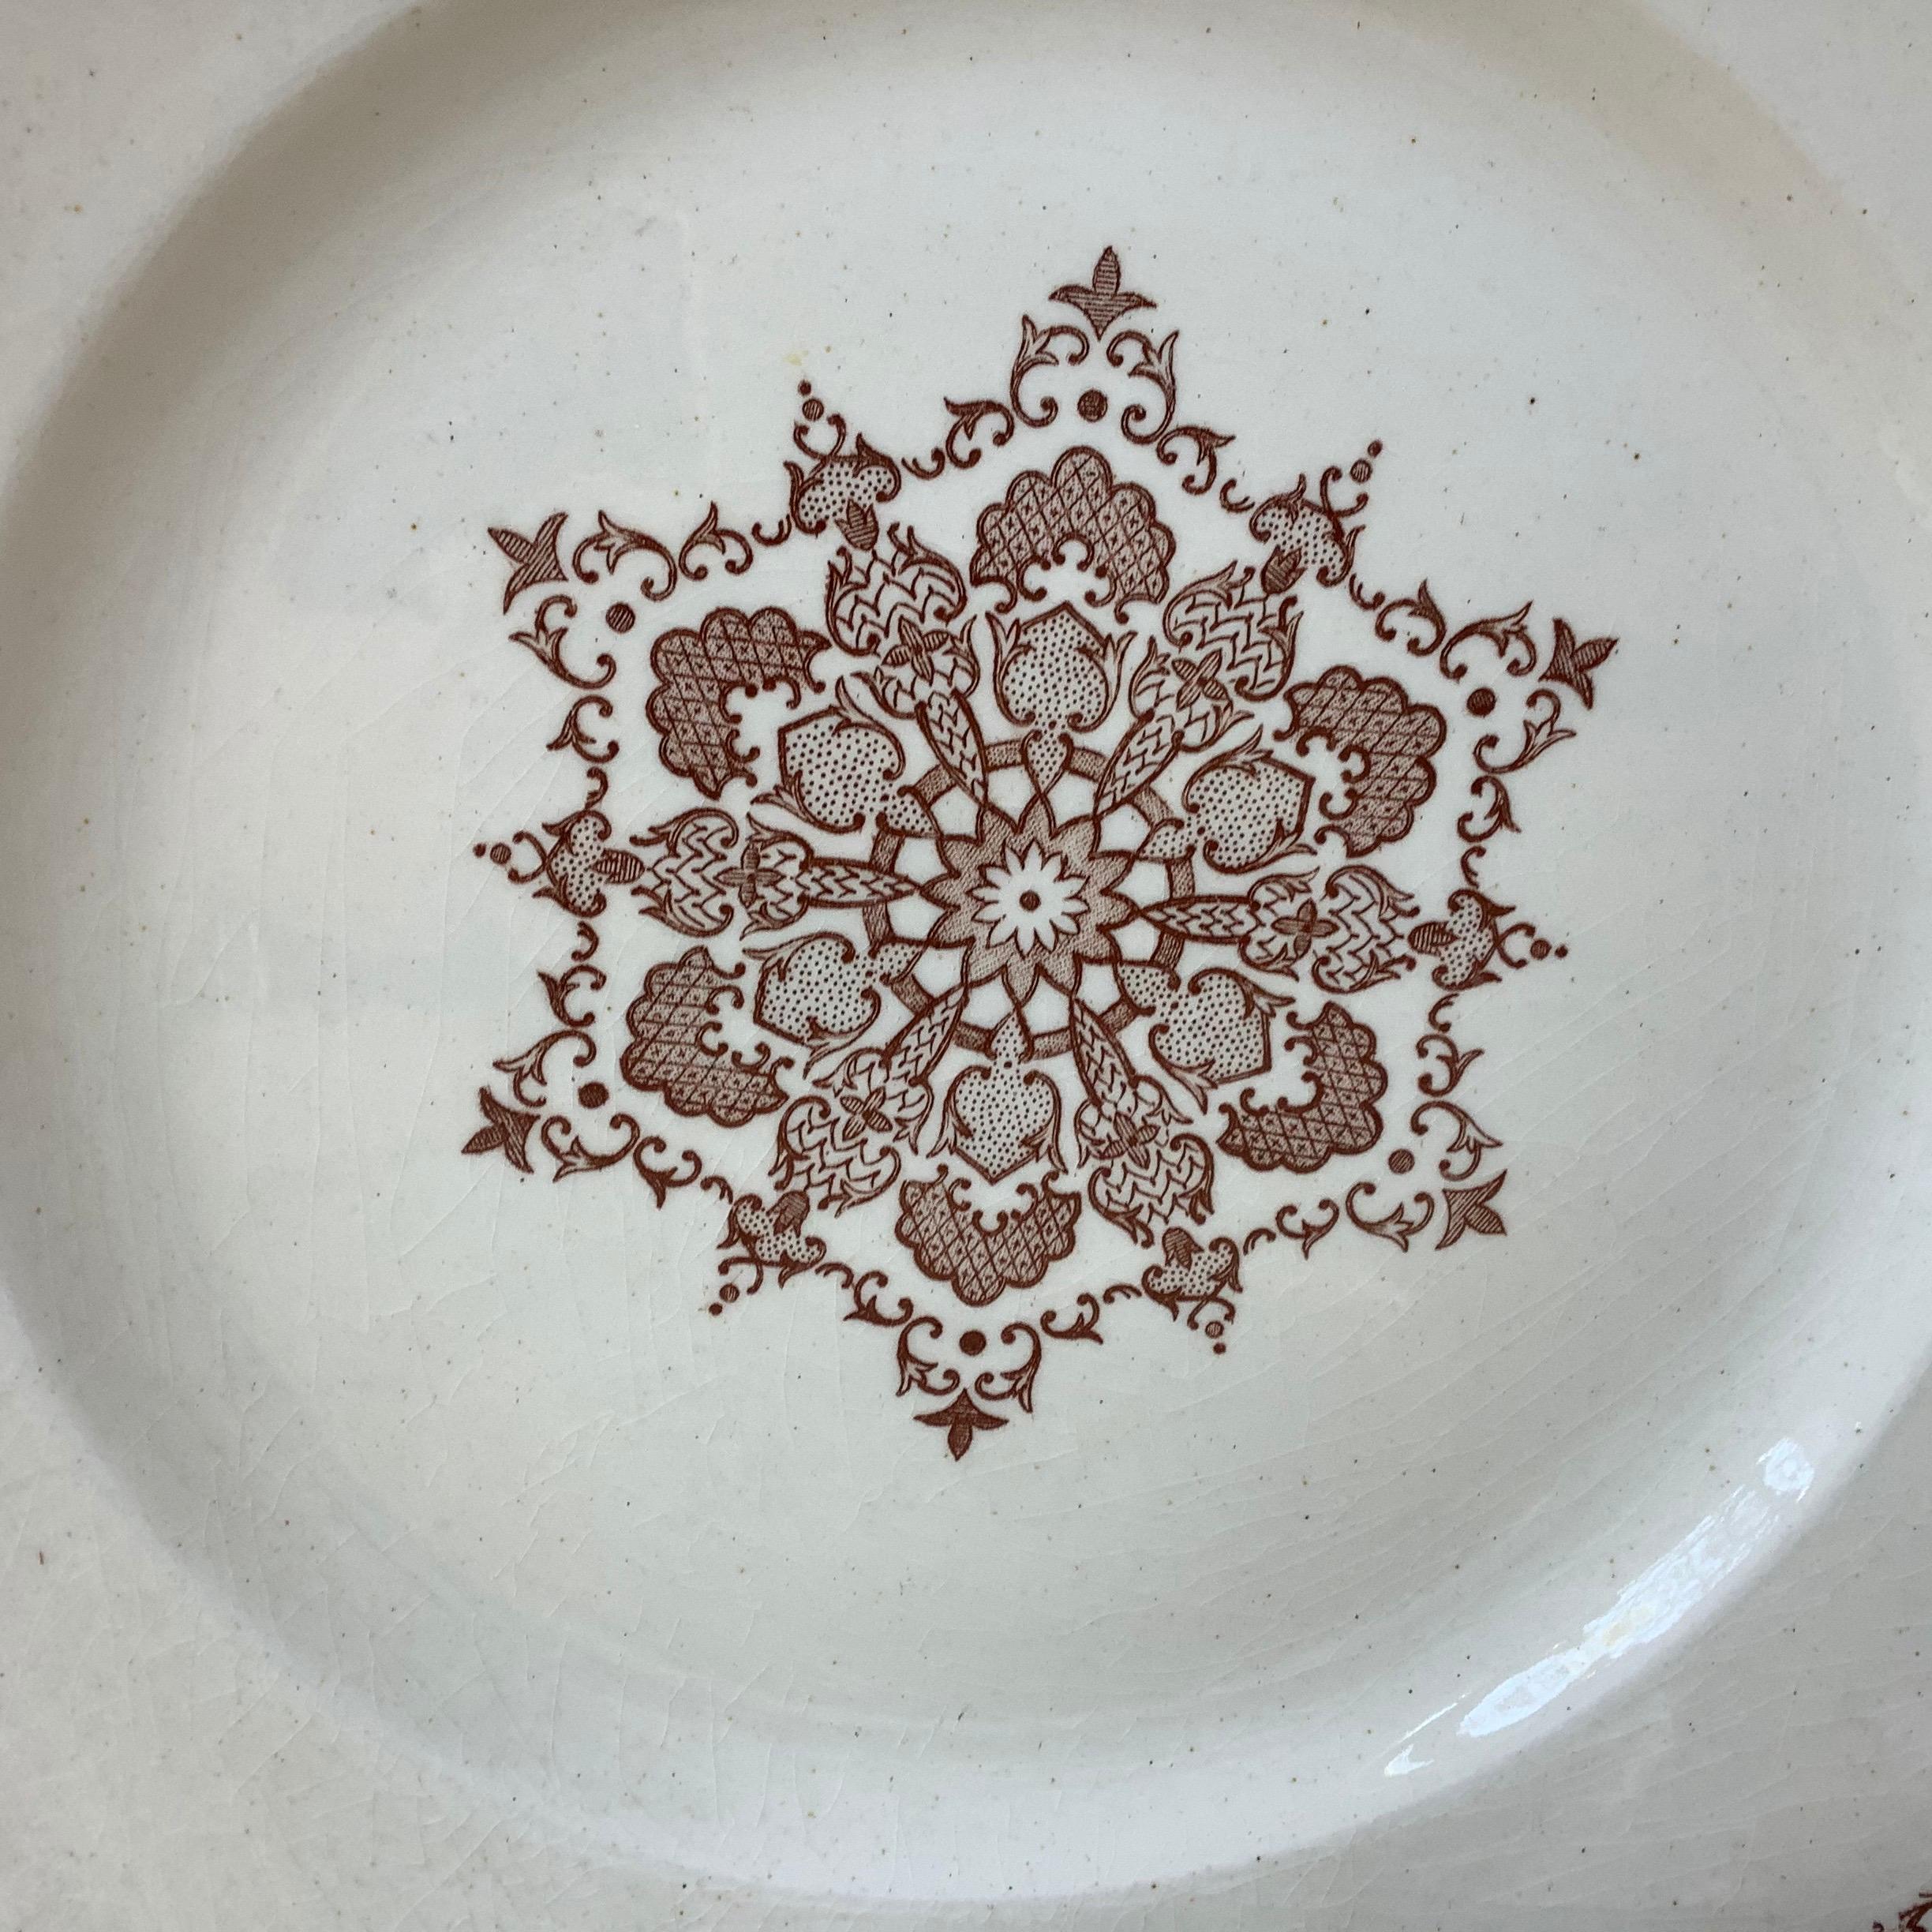 French faience dinner plate signed Salins, circa 1890.
Decorated with snowflakes.
4 plates are available.